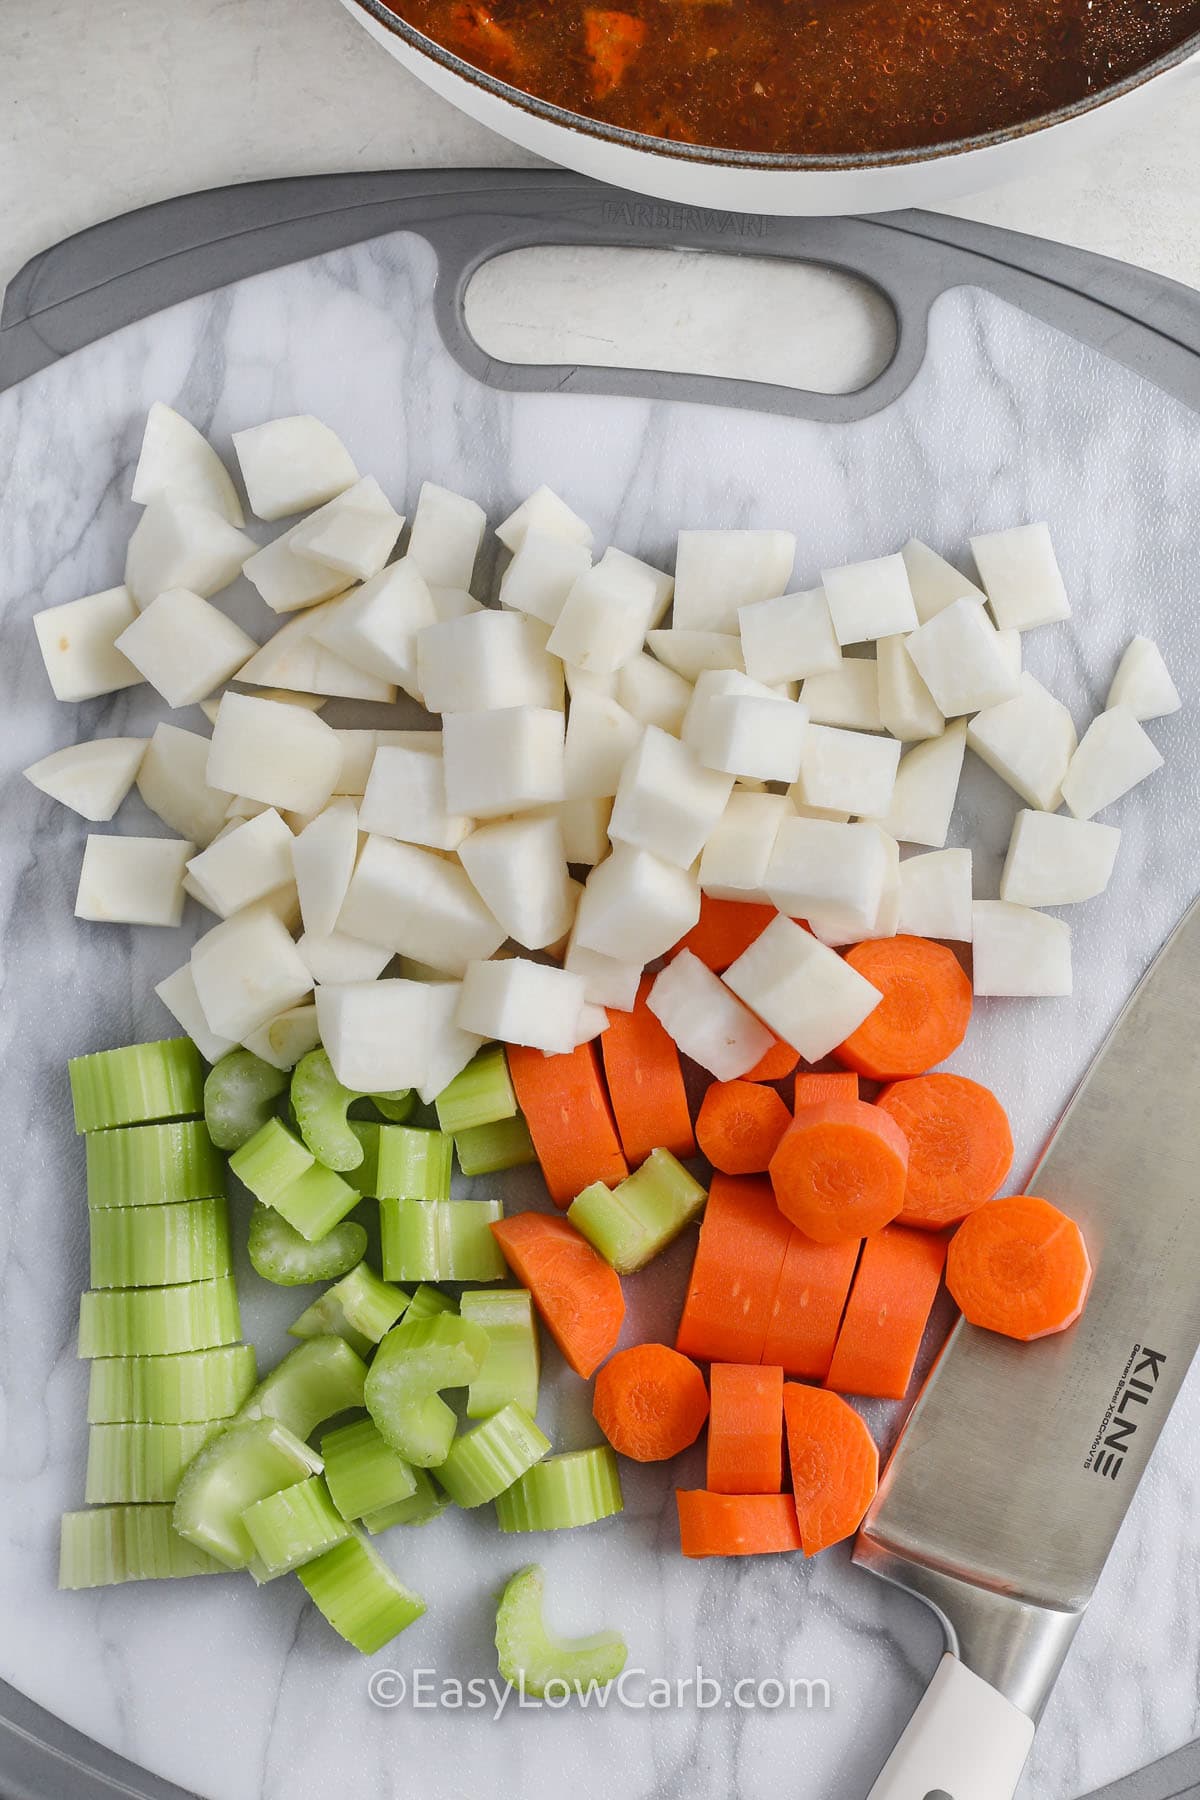 chopping vegetables to make Beef and Vegetable Soup